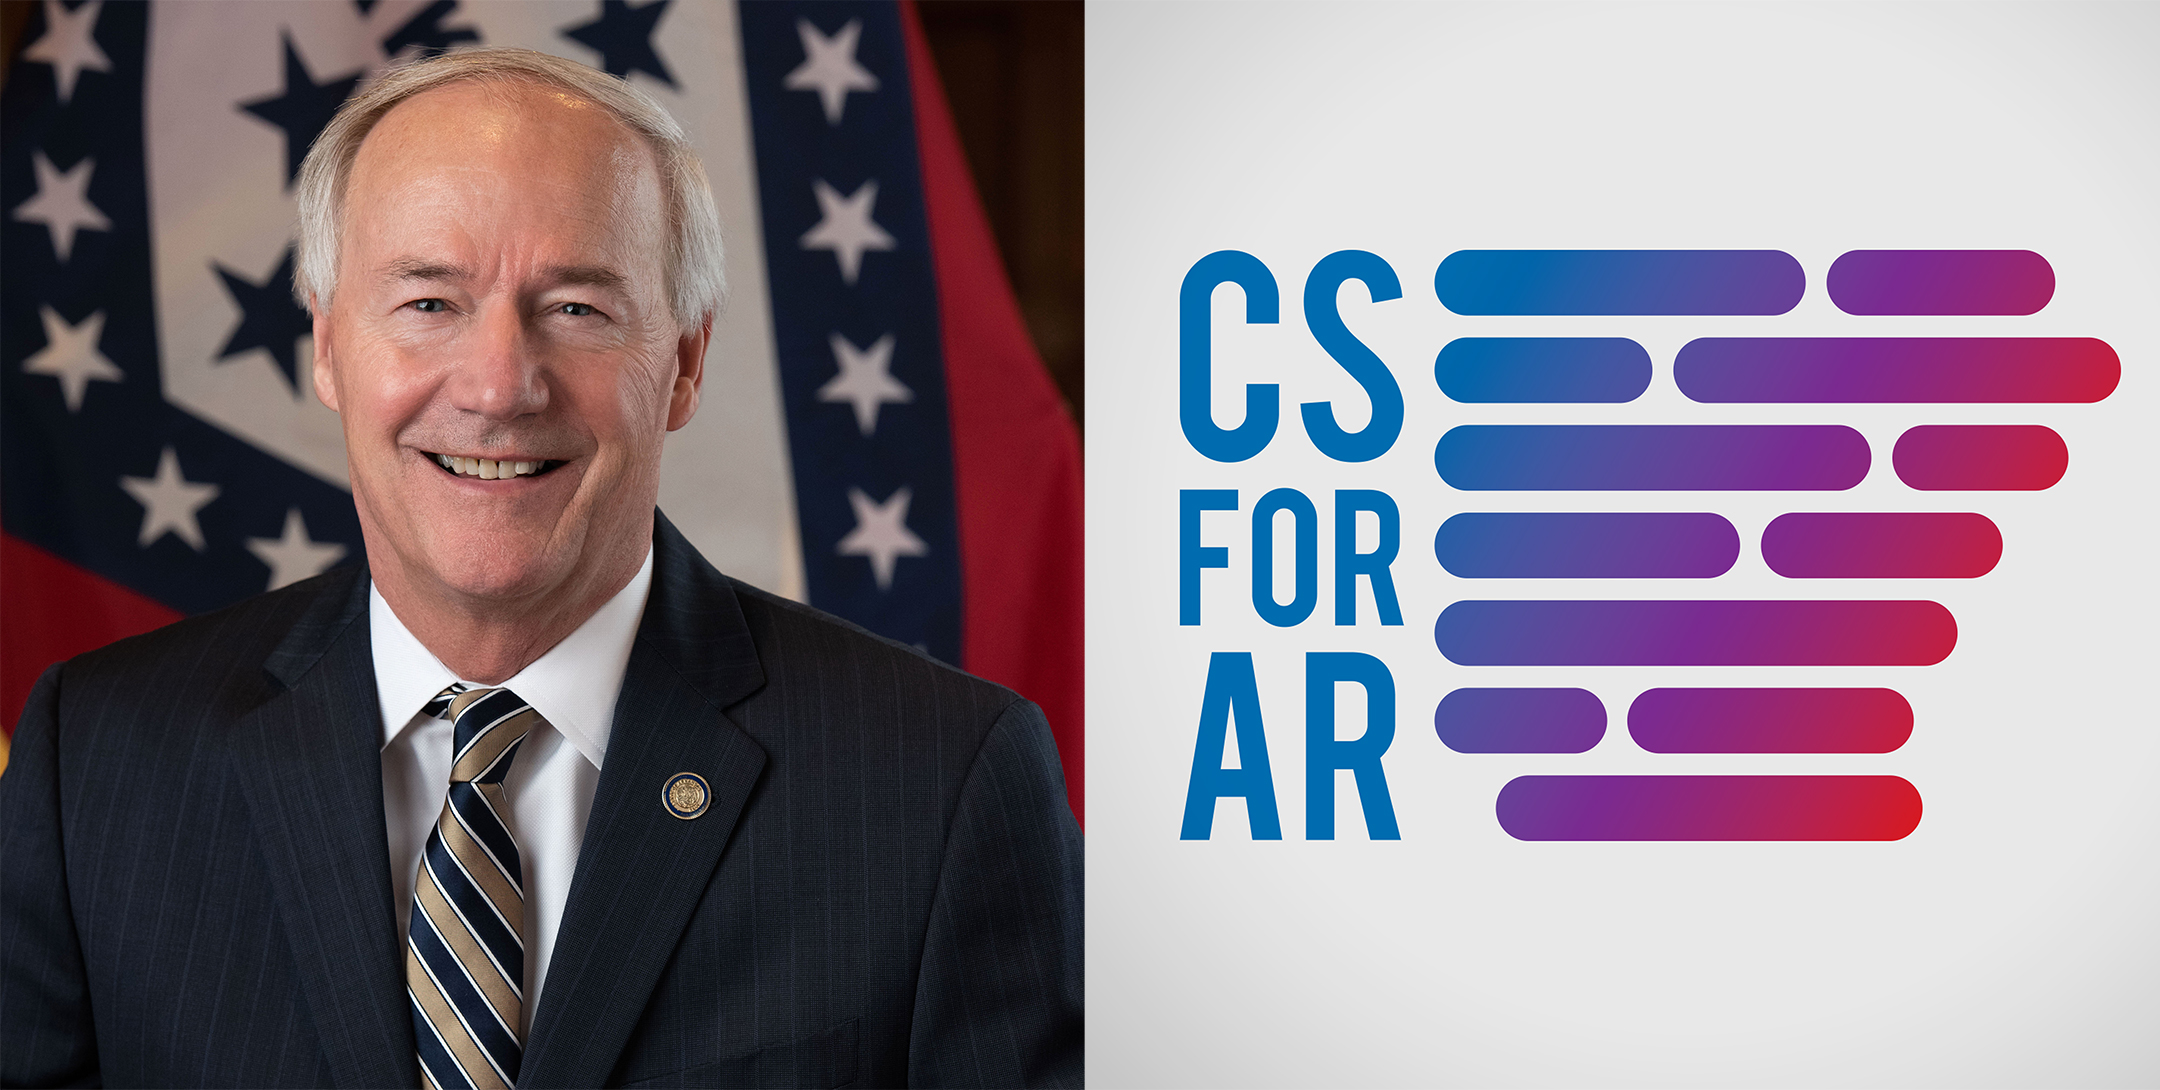 Headshot of Asa Hutchinson on the left, the CS for AR logo in on the right